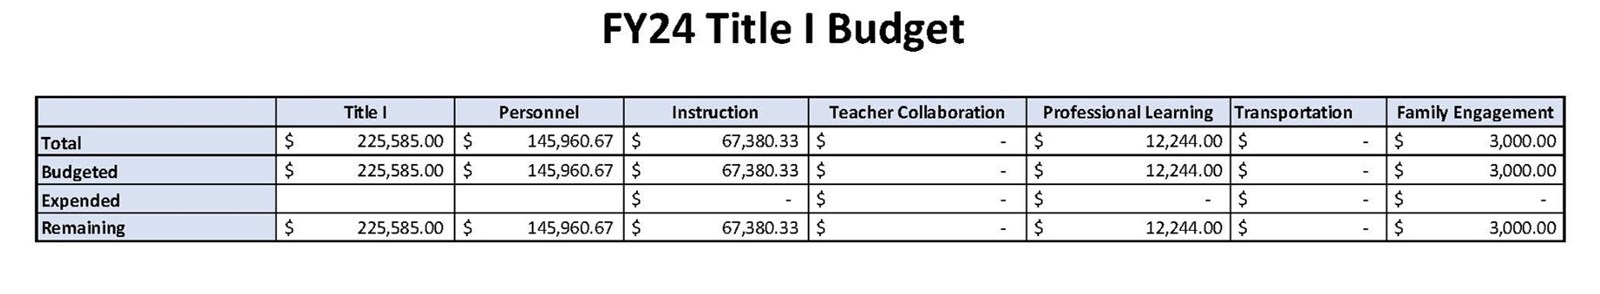 Austell%20FY24%20Title%20I%20Budget%20Snapshot%20(Picture)-2.jpg